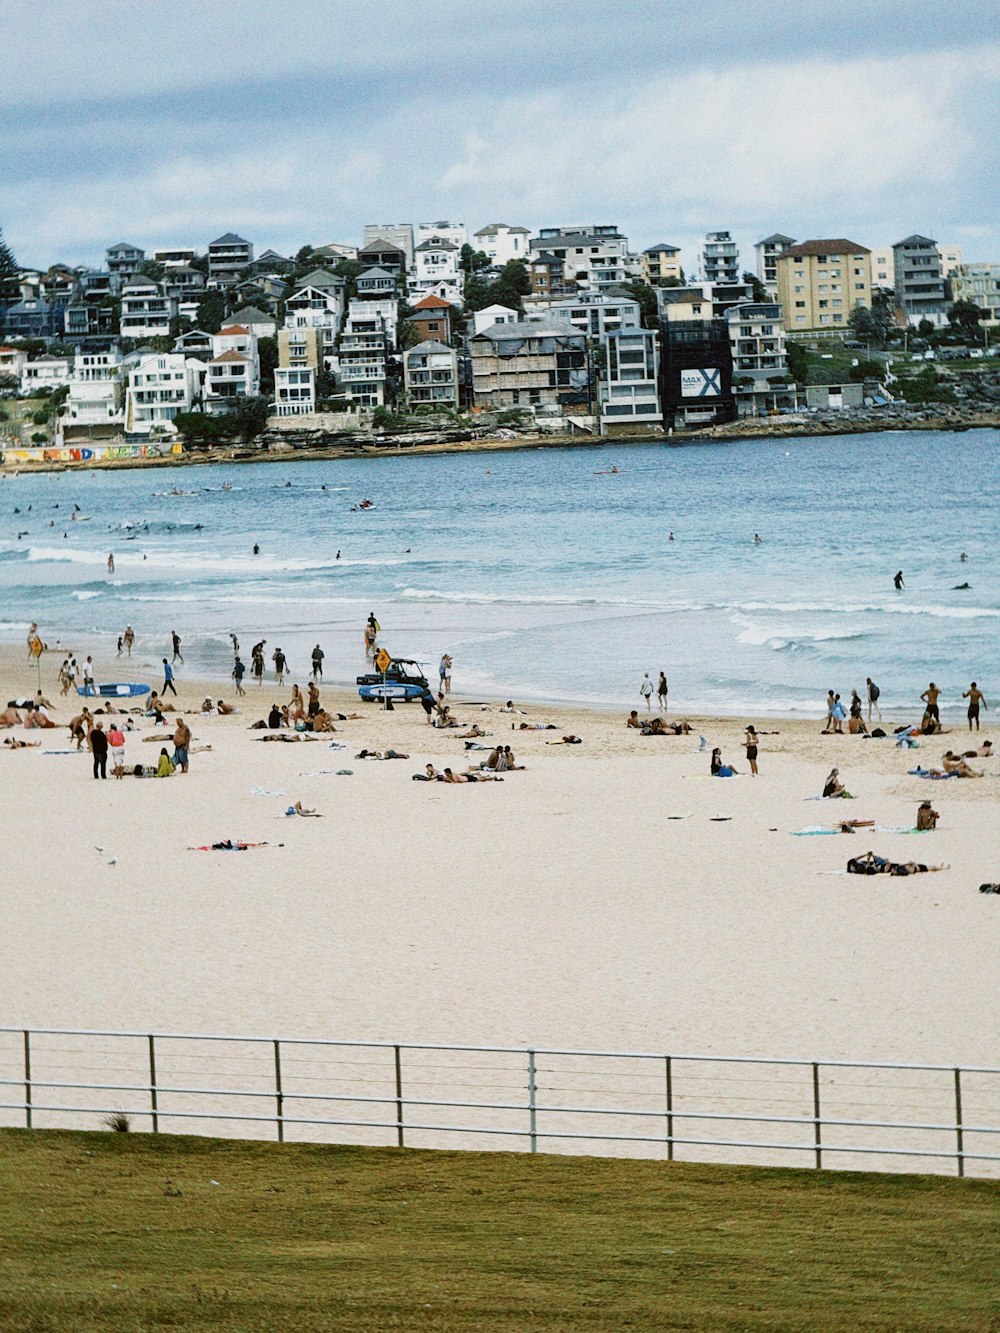 many people are on the beach near the water